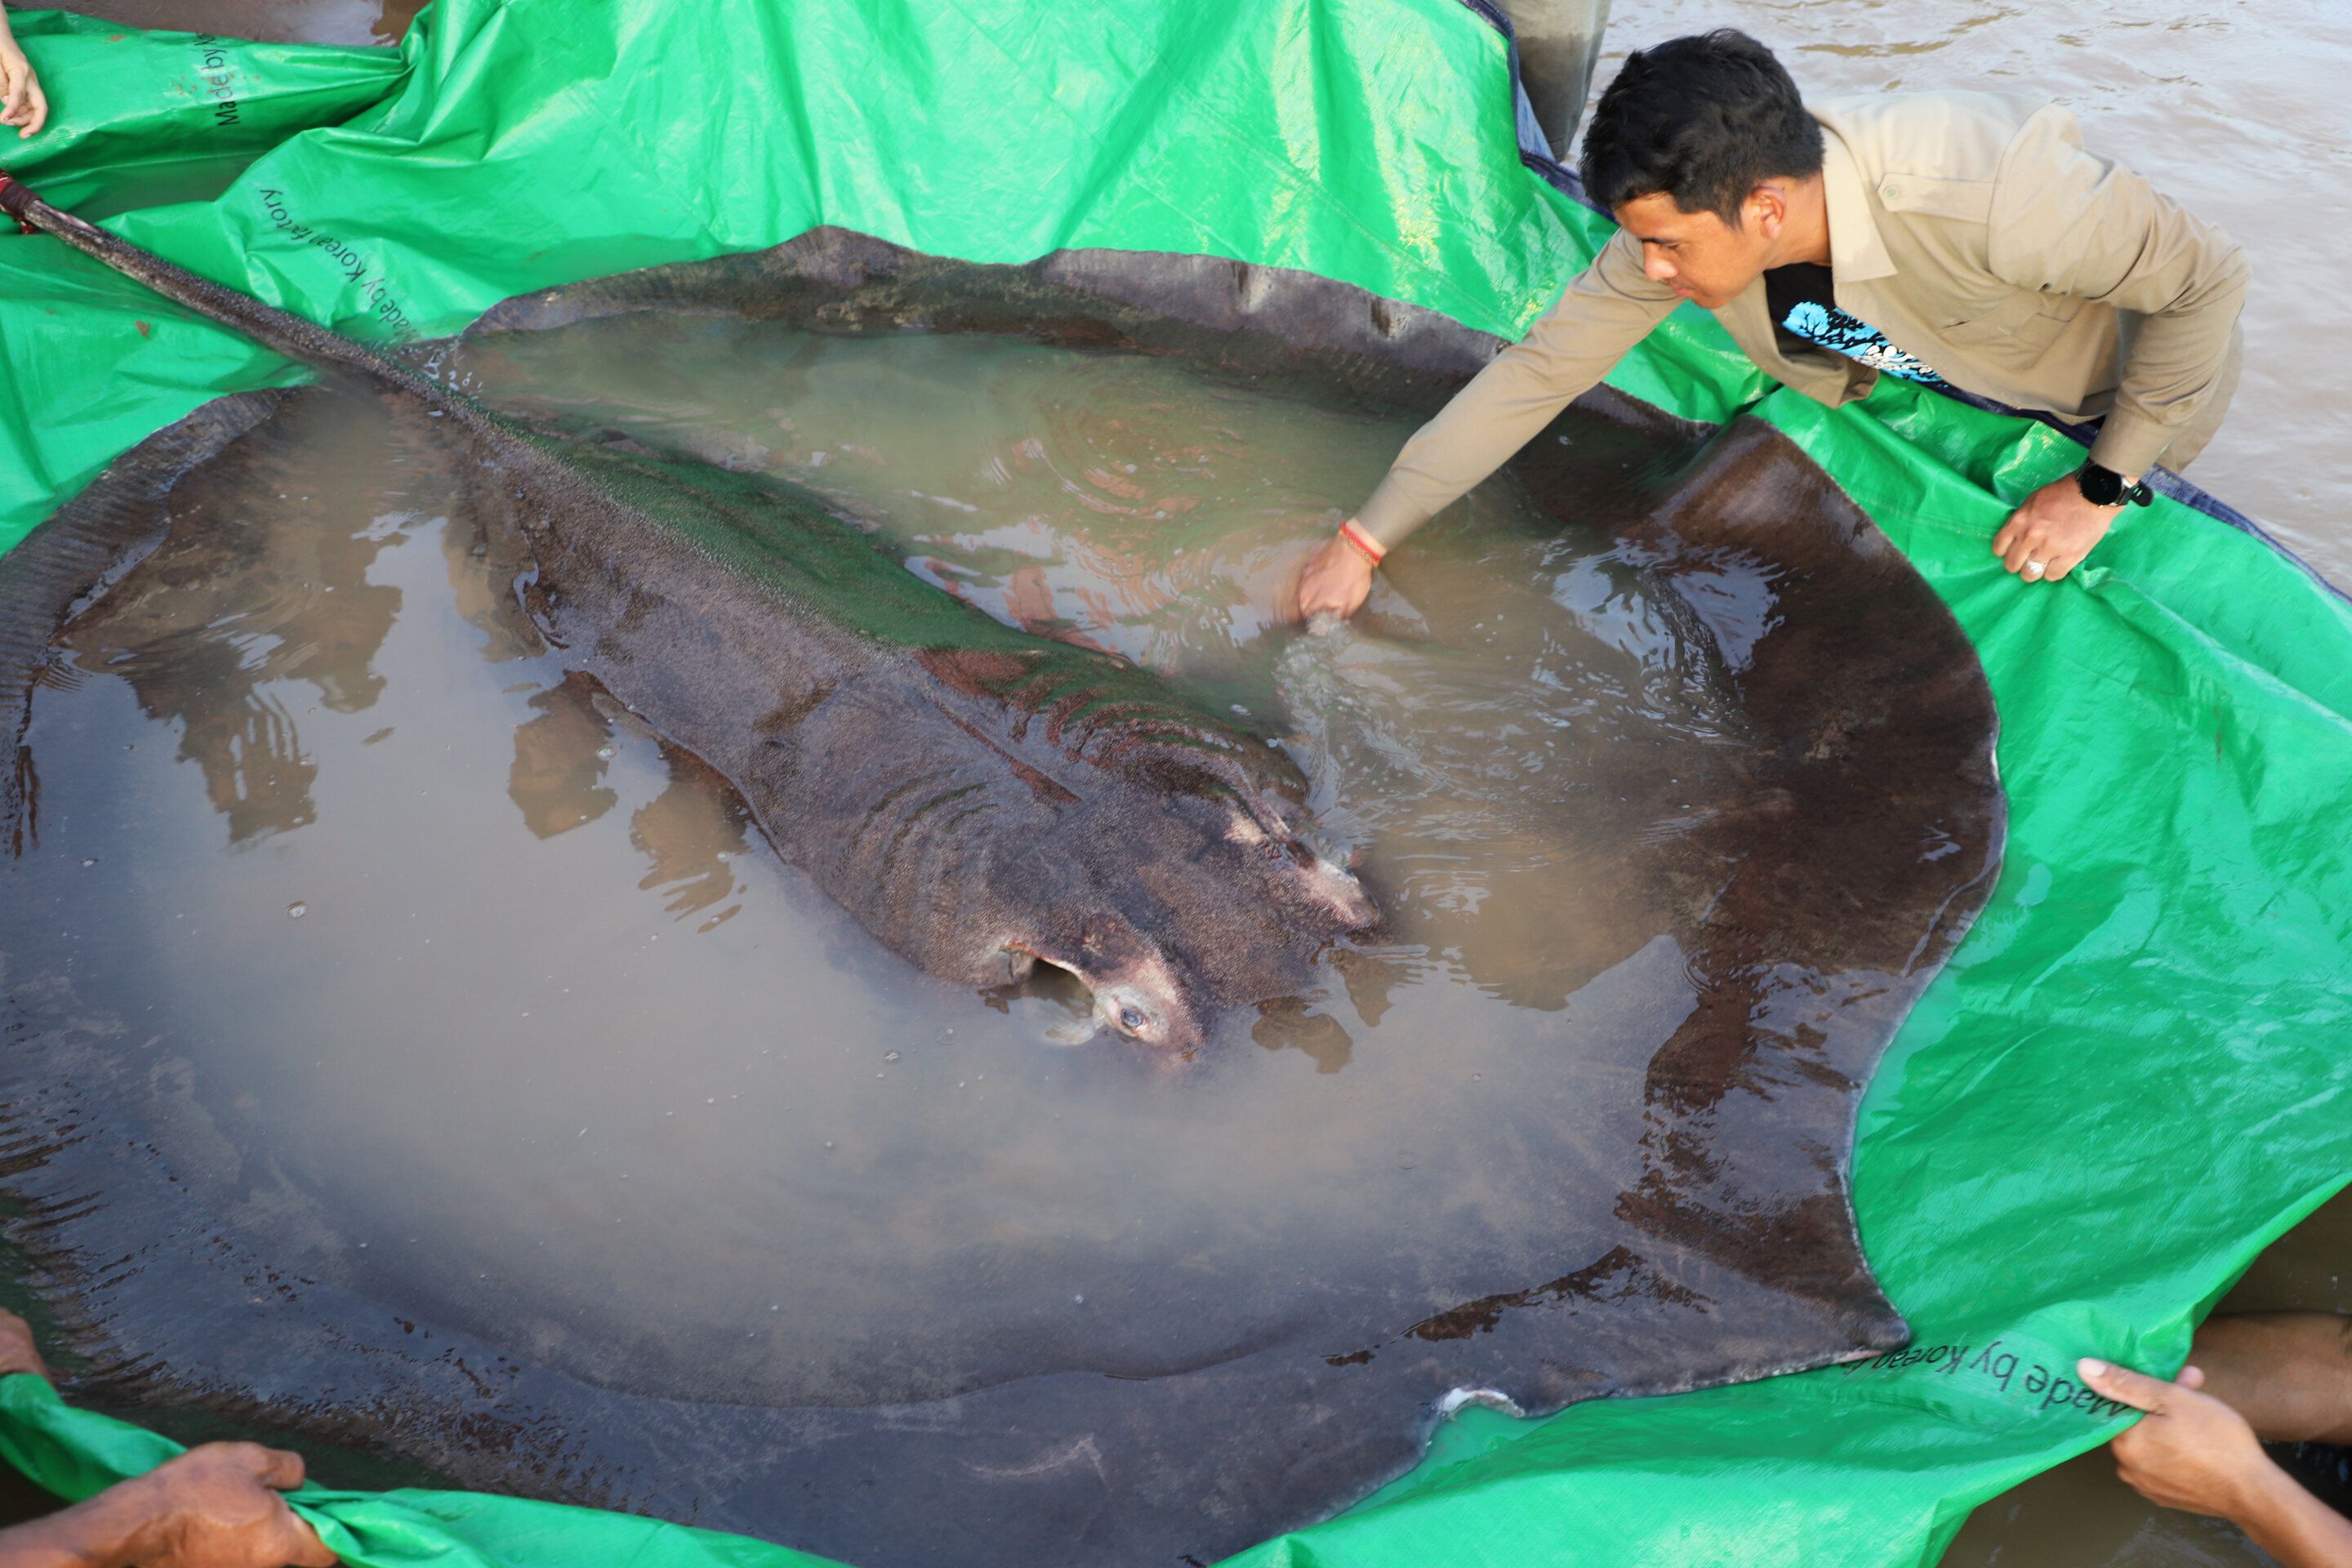 How the World’s Largest Freshwater Fish Grew to a Whopping 660 Pounds